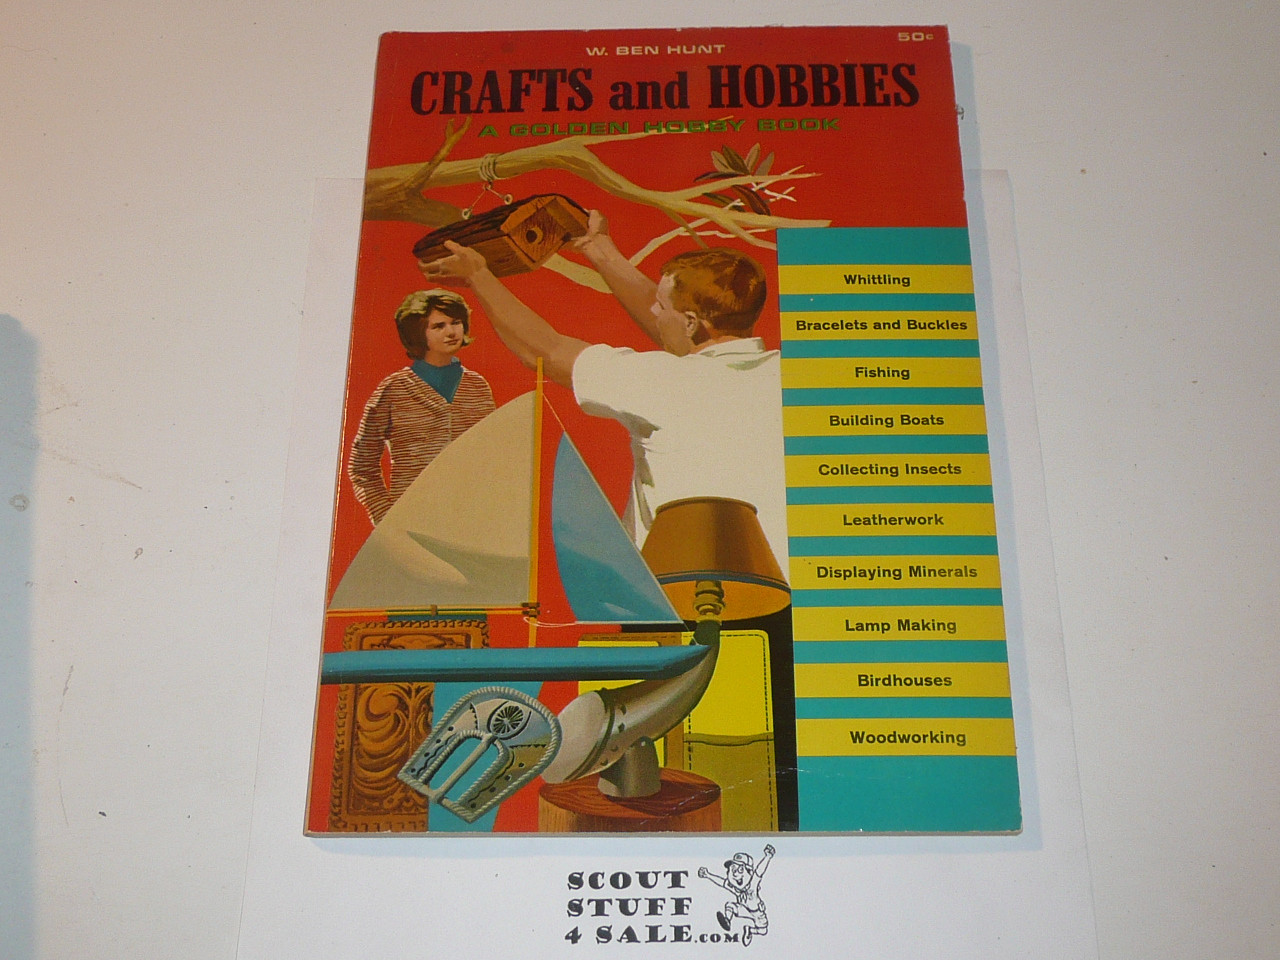 Crafts and Hobbies, by W. Ben Hunt, 1964